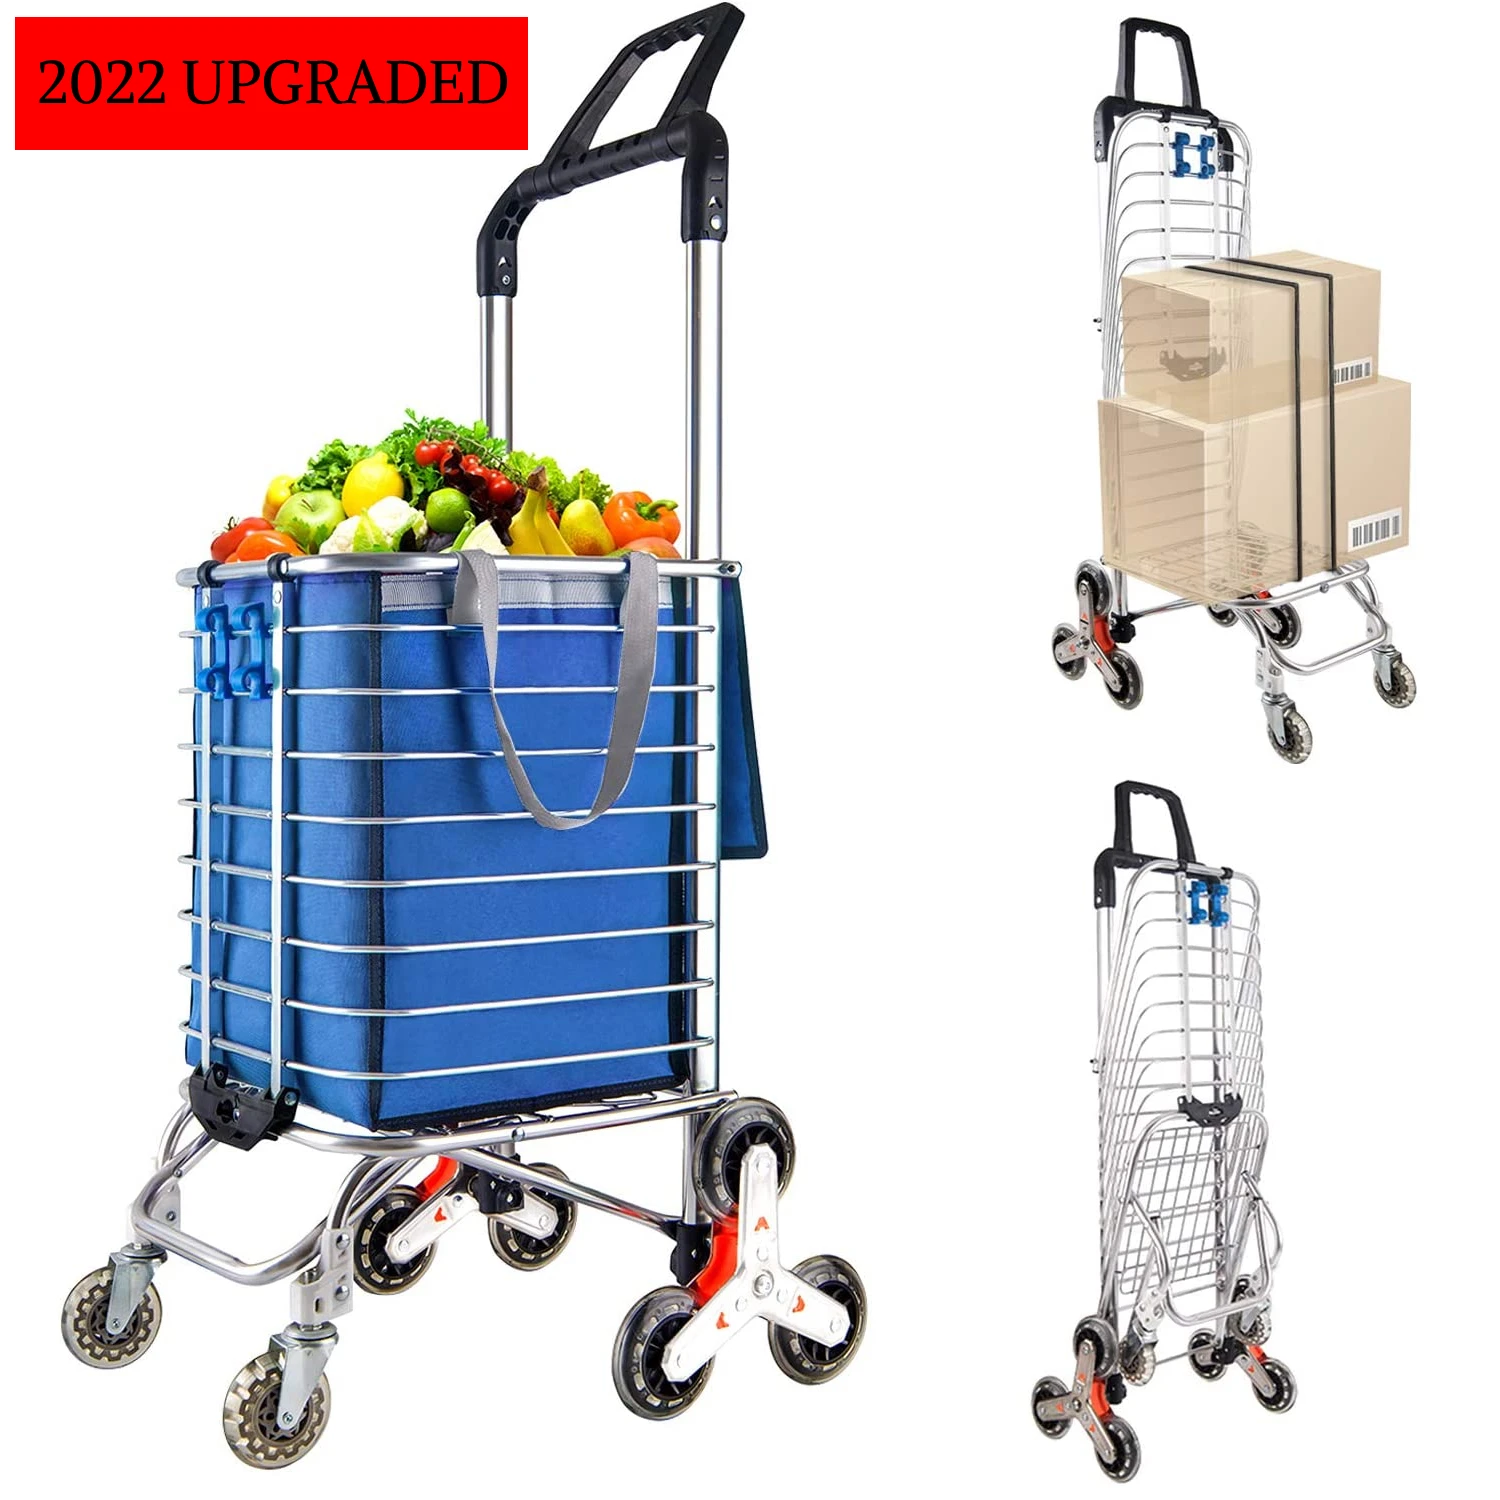 

Foldable Shopping Cart Portable Grocery Cart Utility Lightweight Stair Climbing Shopping Carts with Rolling Swivel Wheel